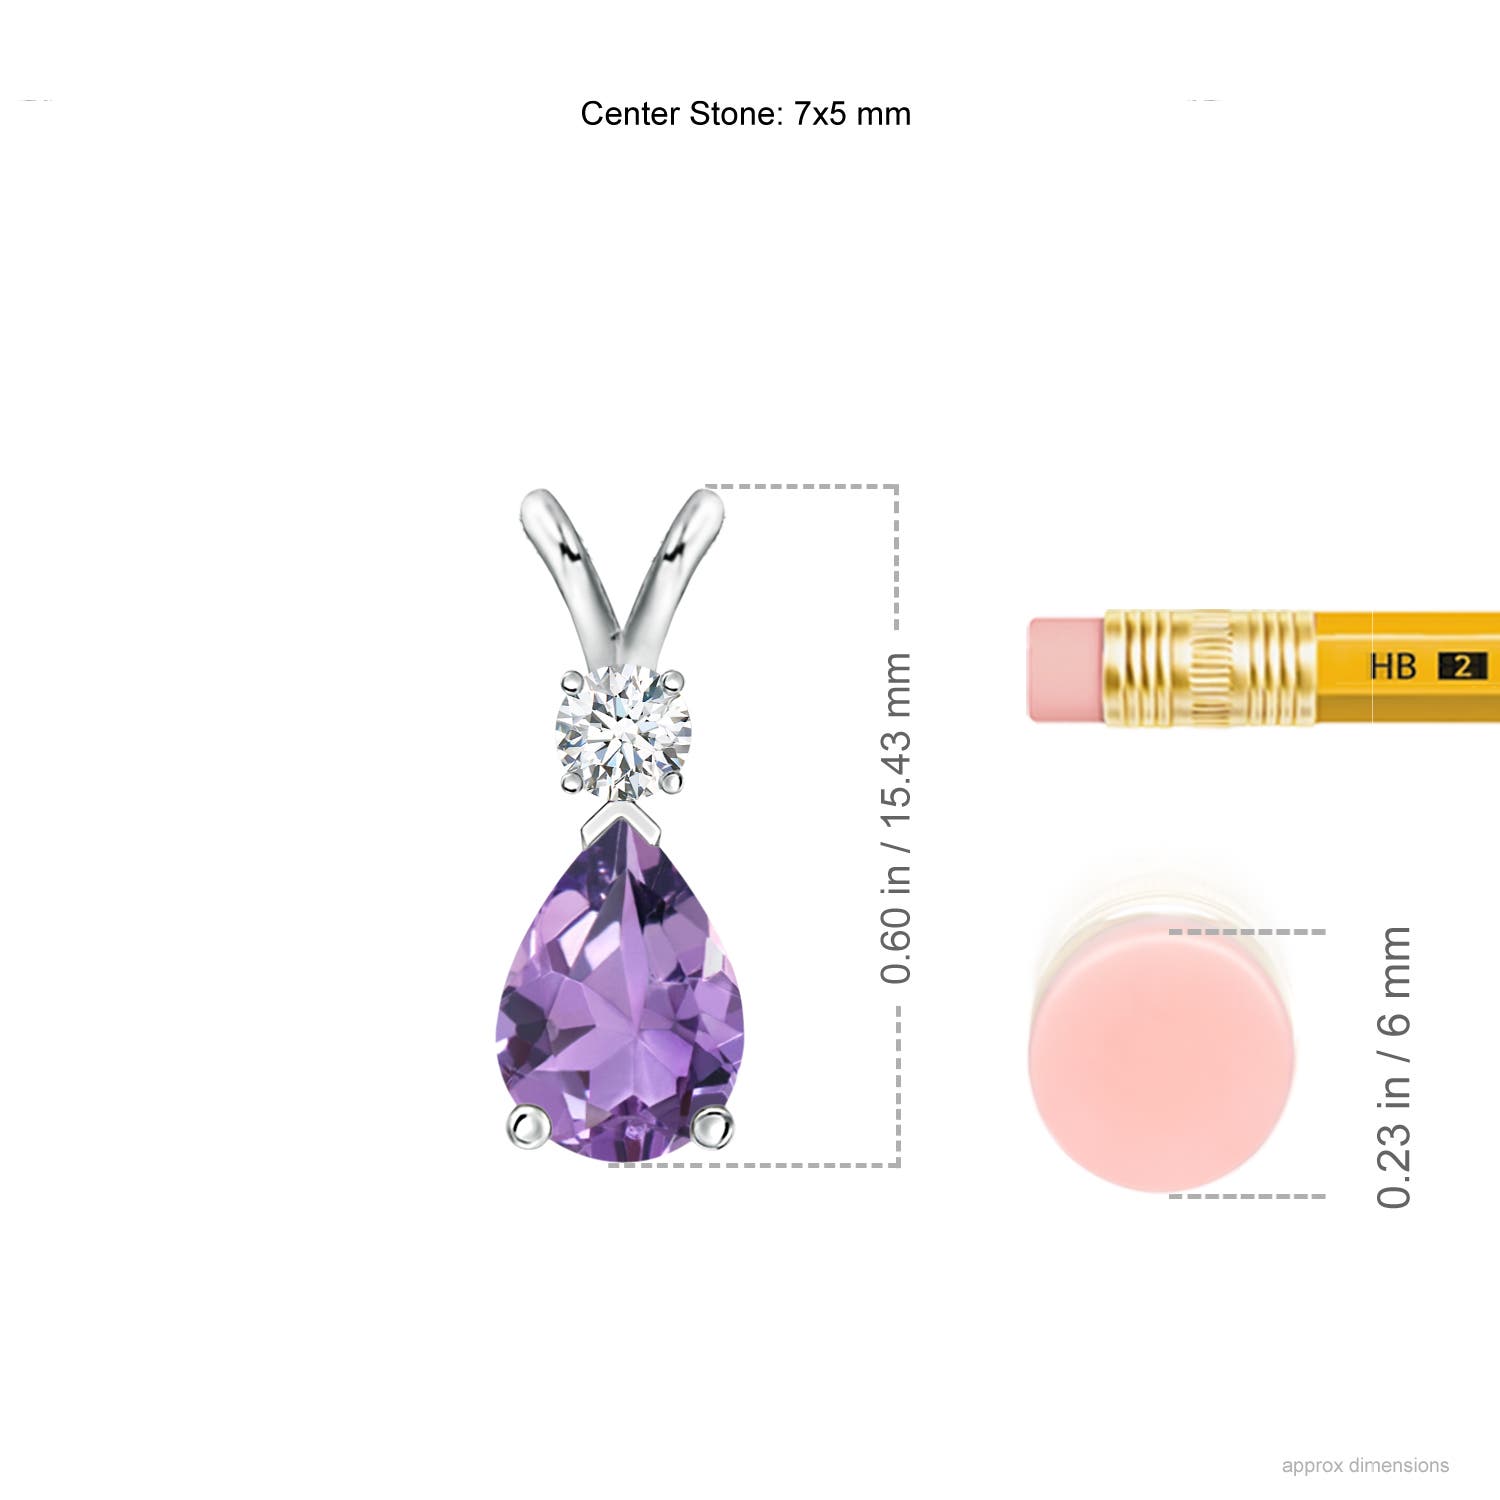 A - Amethyst / 0.67 CT / 14 KT White Gold